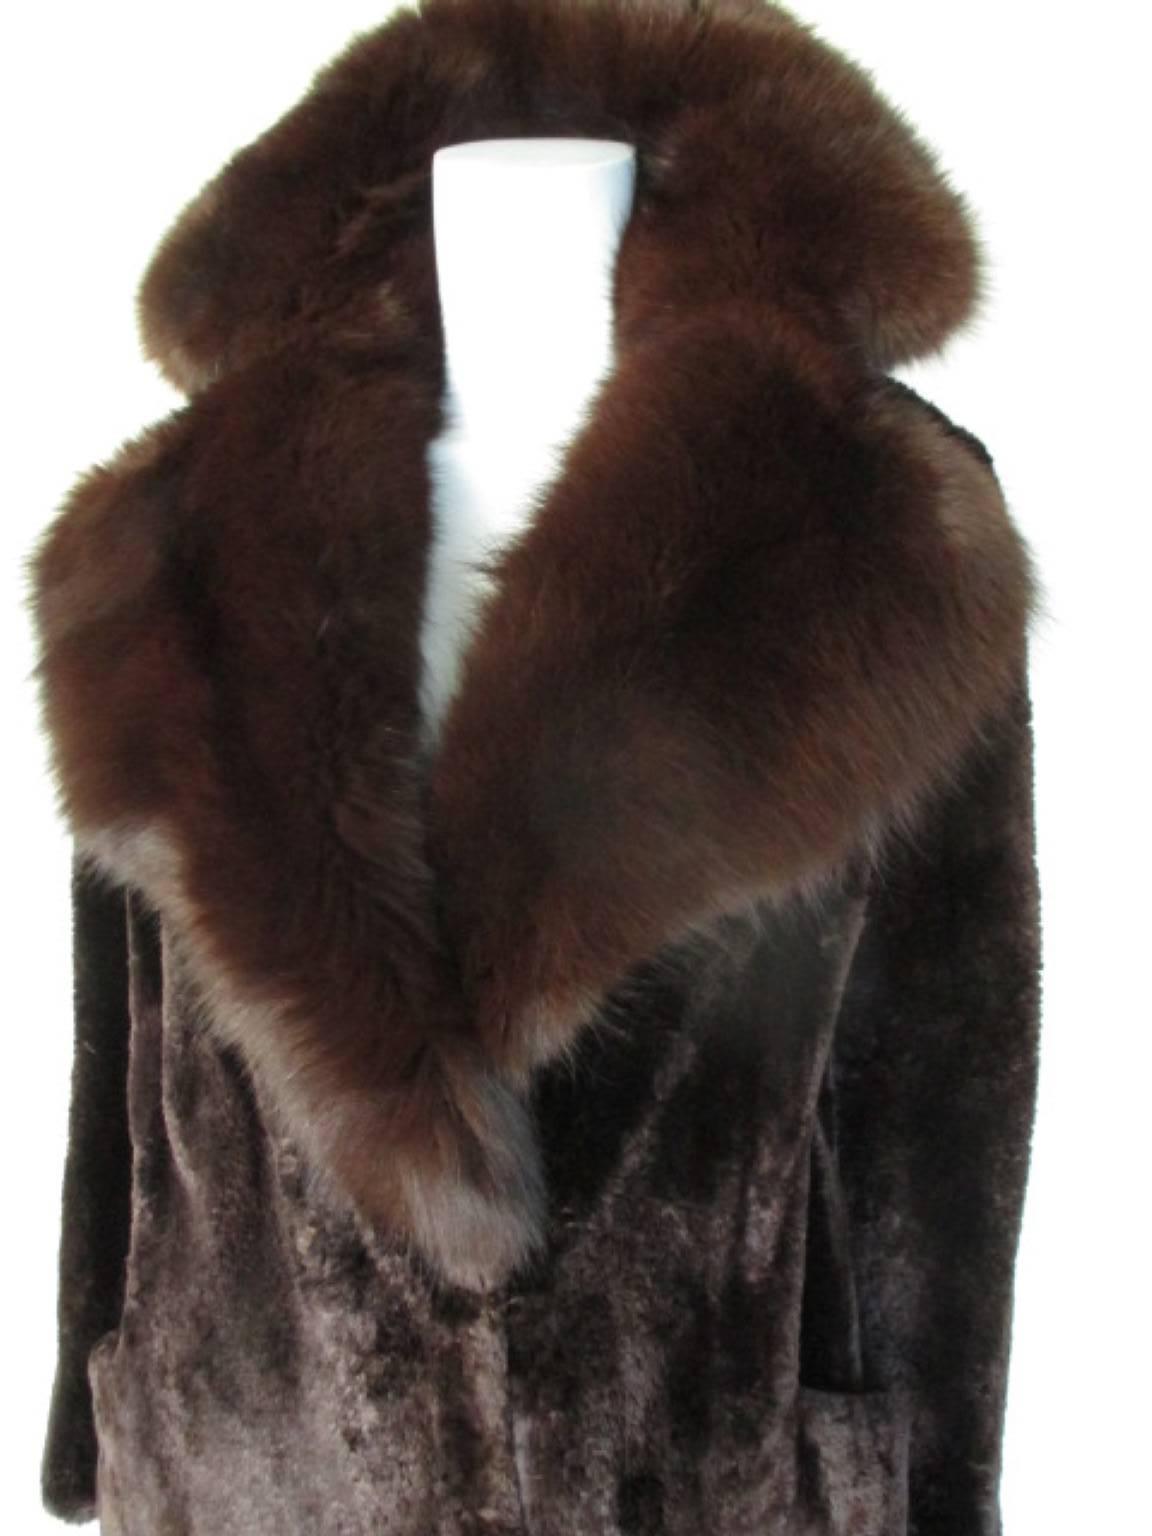 Authentic vintage  shaved beaver coat trimmed in luscious fox fur.
The coat has 2 pockets and 3 hooks.

Its in good vintage condition
Size fits about eu 38 or us 8
Please note that vintage items are not new and therefore might have minor